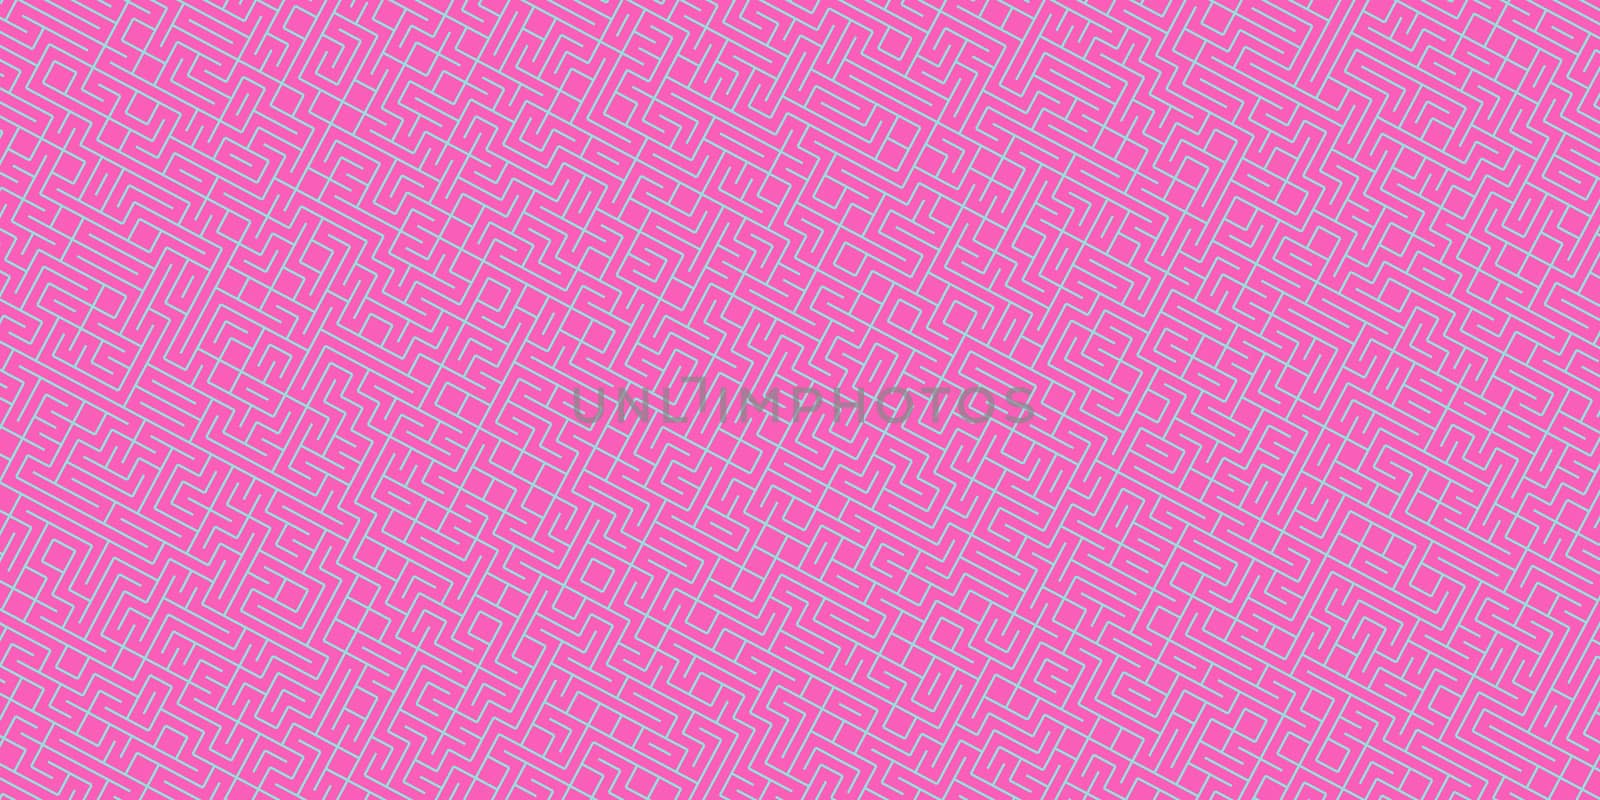 Pink Seamless Outline Labyrinth Background. Maze Path Puzzle Concept. Difficulty Logical Mind Creativity Abstraction. by sanches812